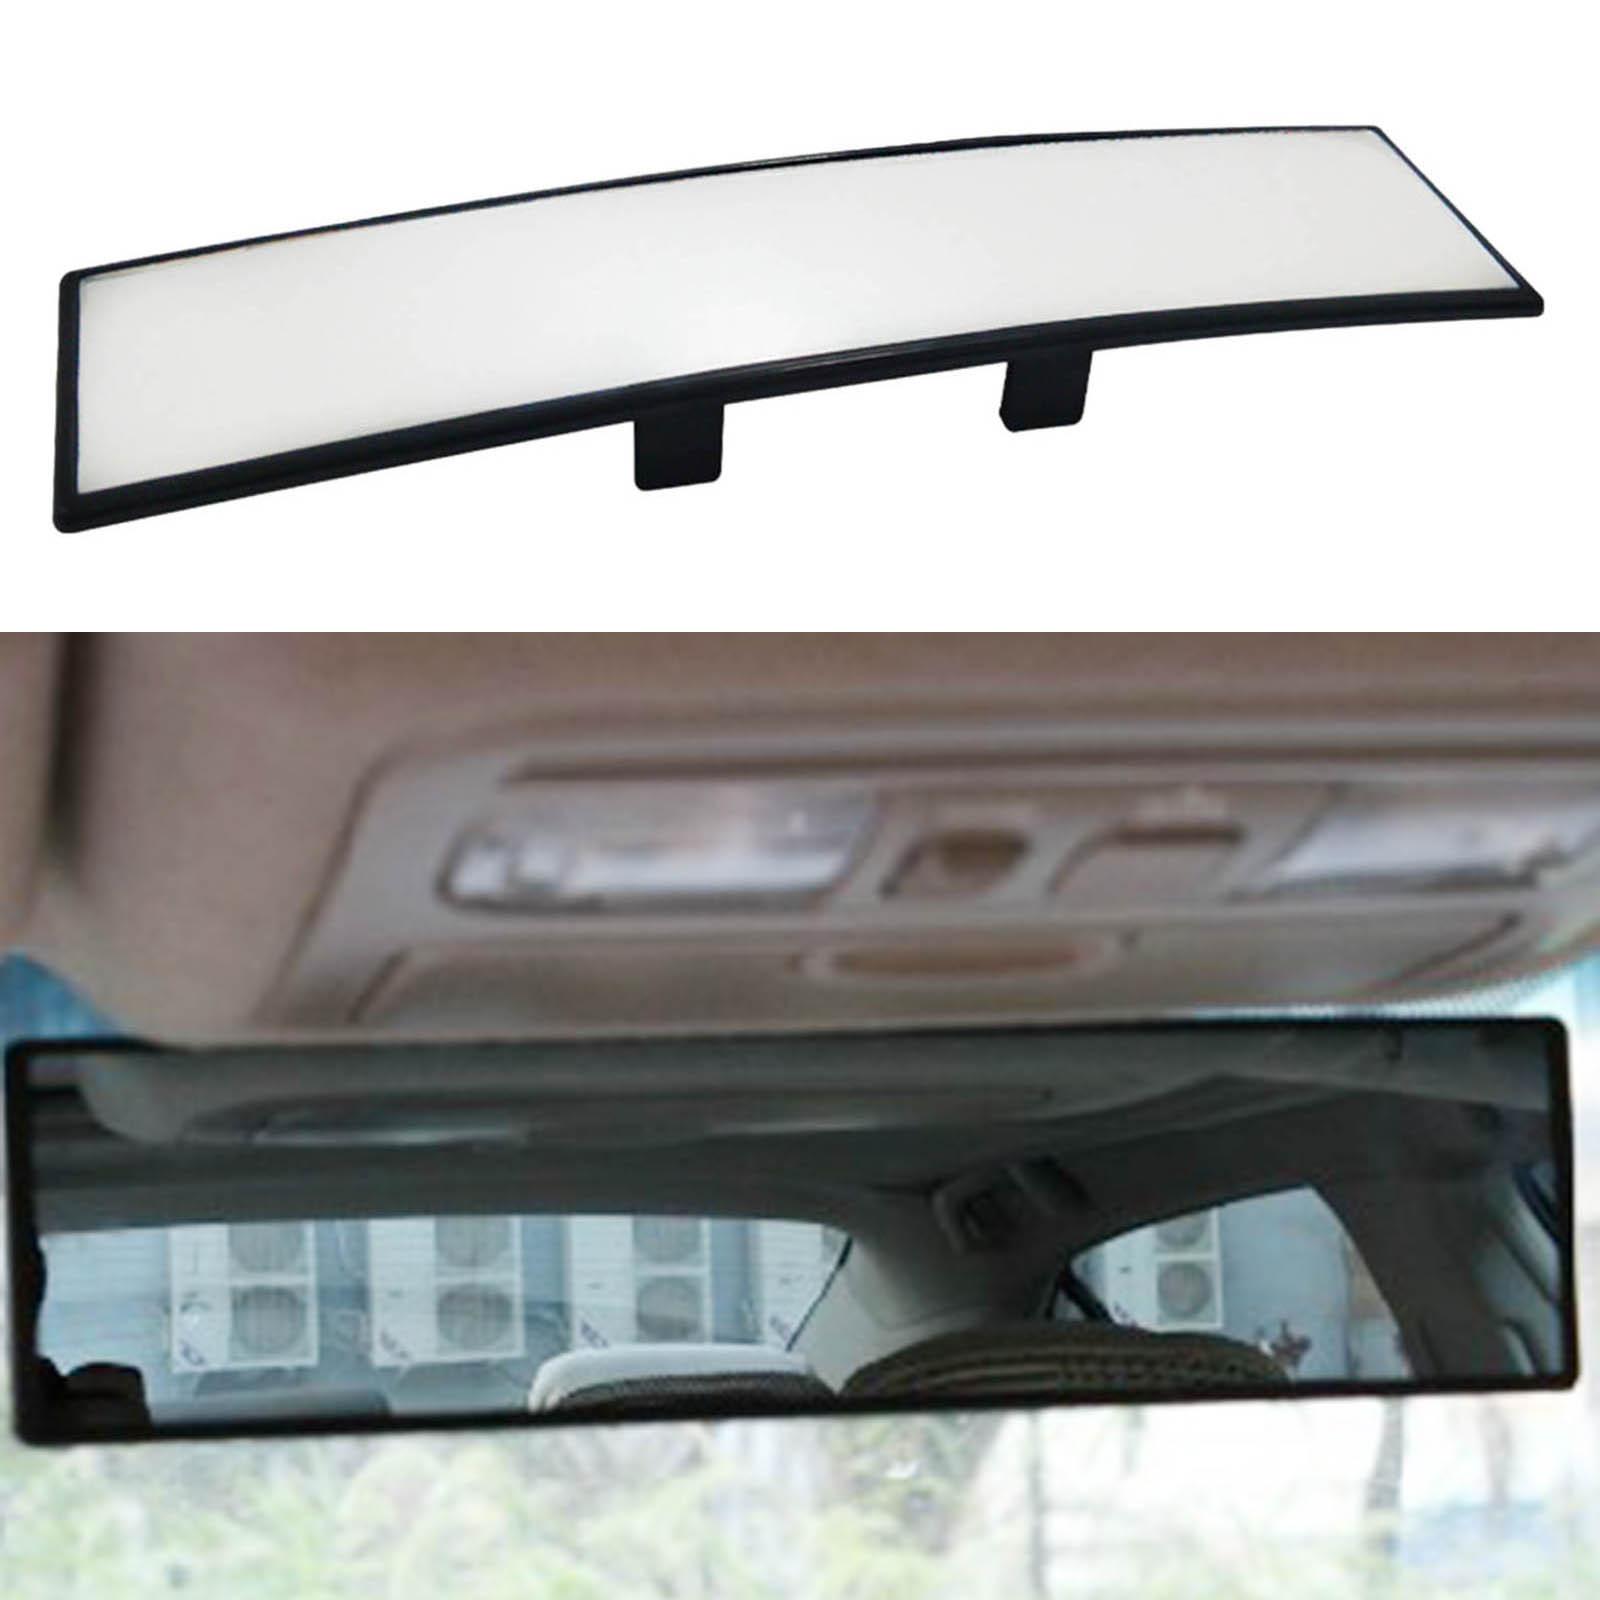 Car Rear View Mirror Wide Angle for Truck Parking Length 270mm White Mirror